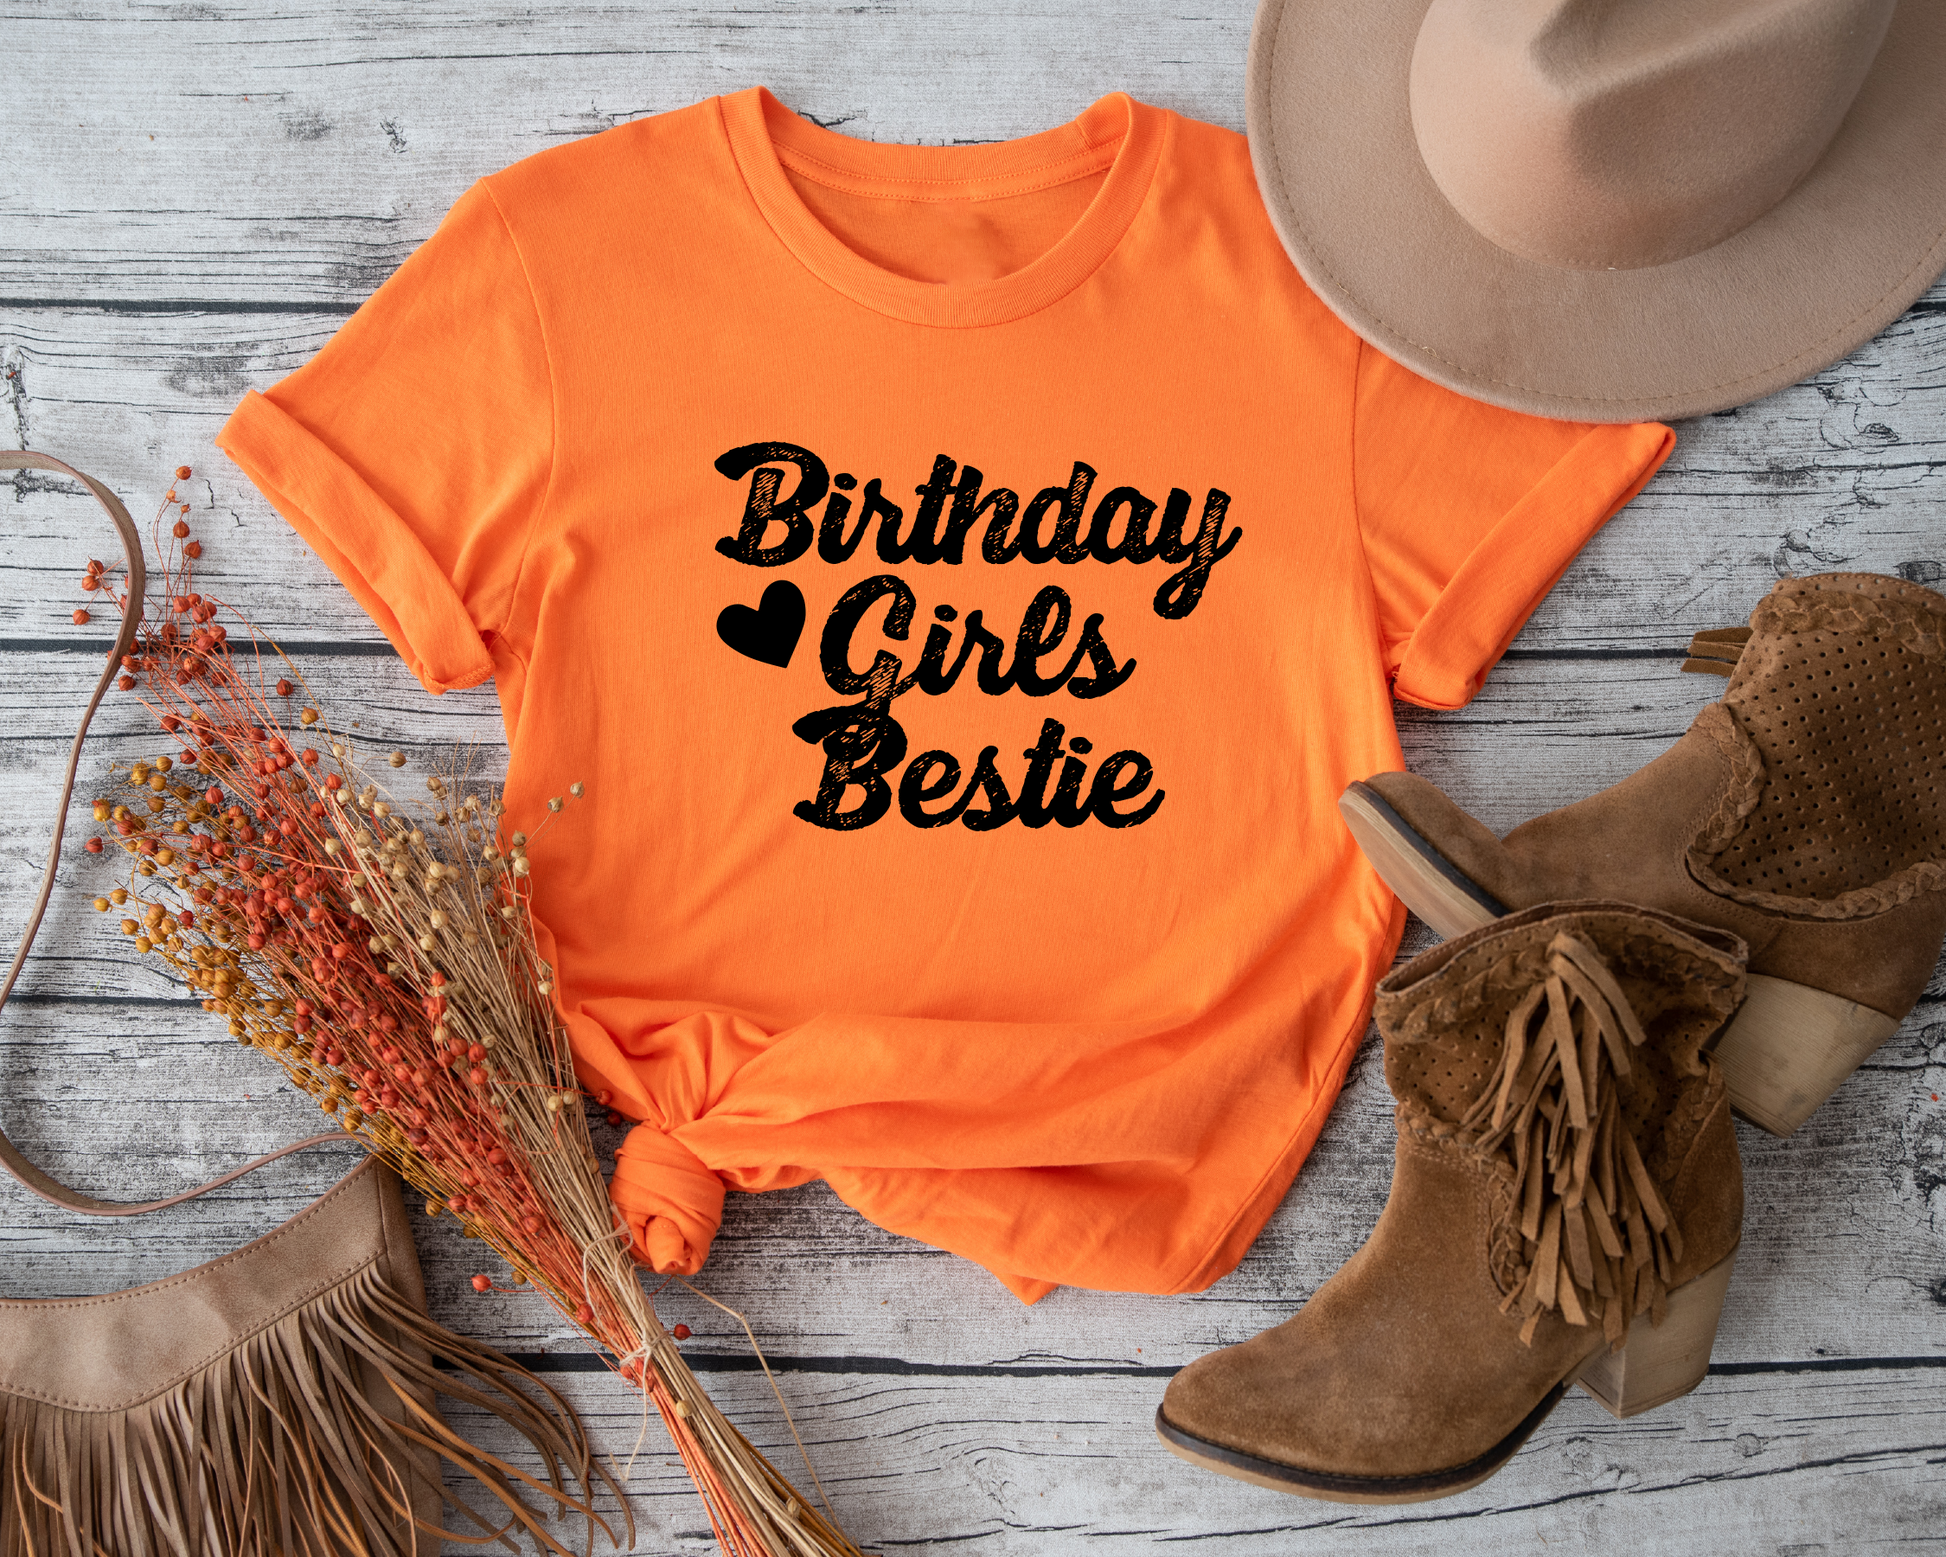 Mark her special day with this unique and eye-catching Girls Birthday T-Shirt.